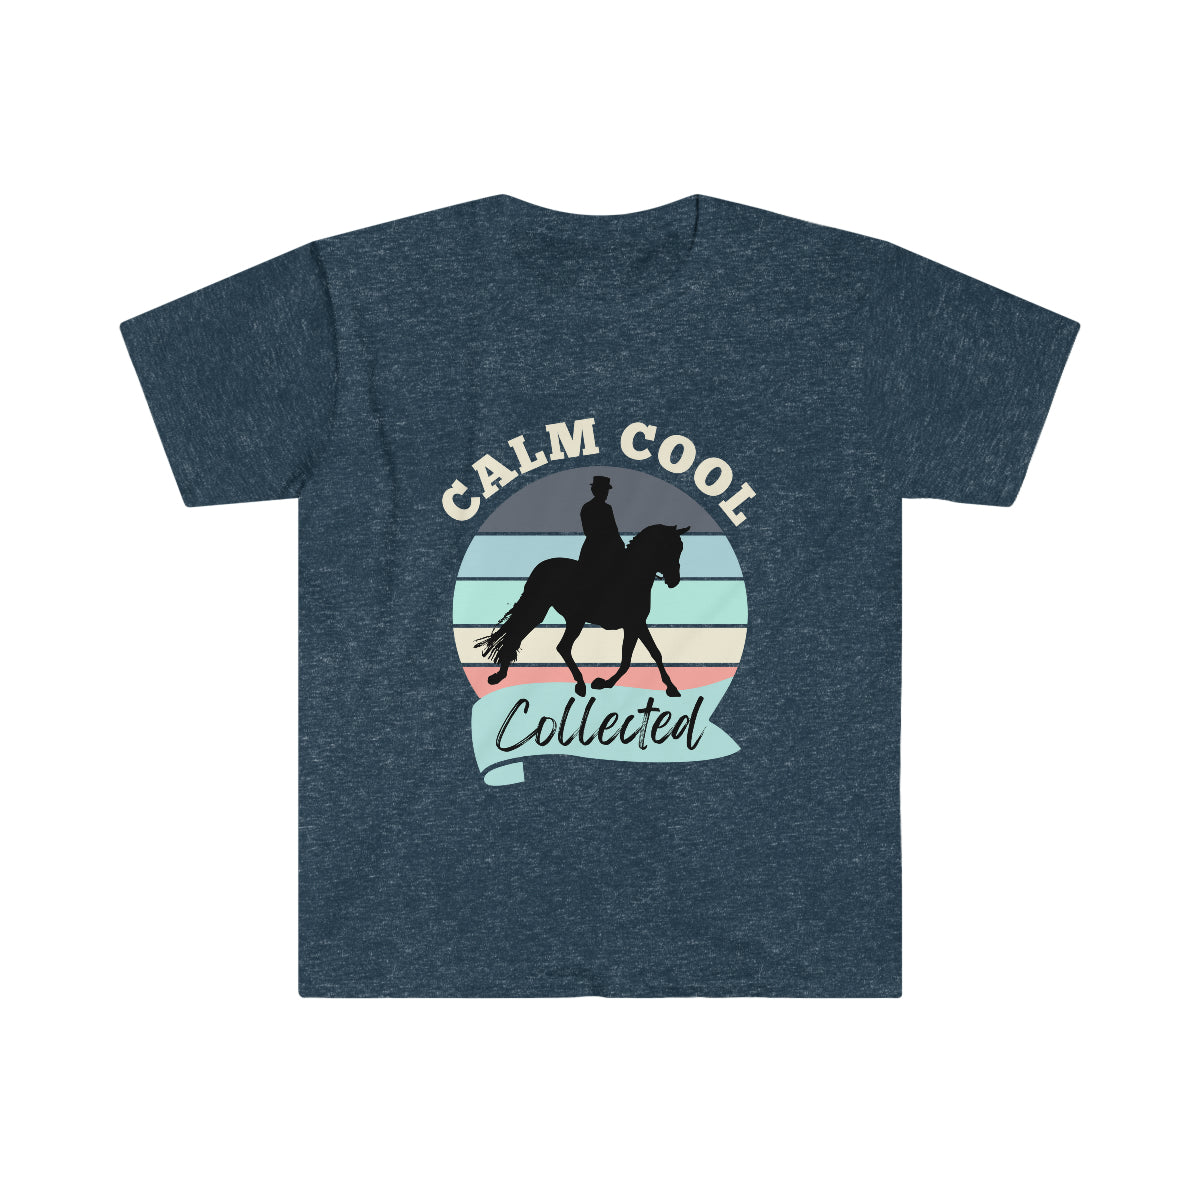 Calm Cool Collected Dressage Horse T-Shirt